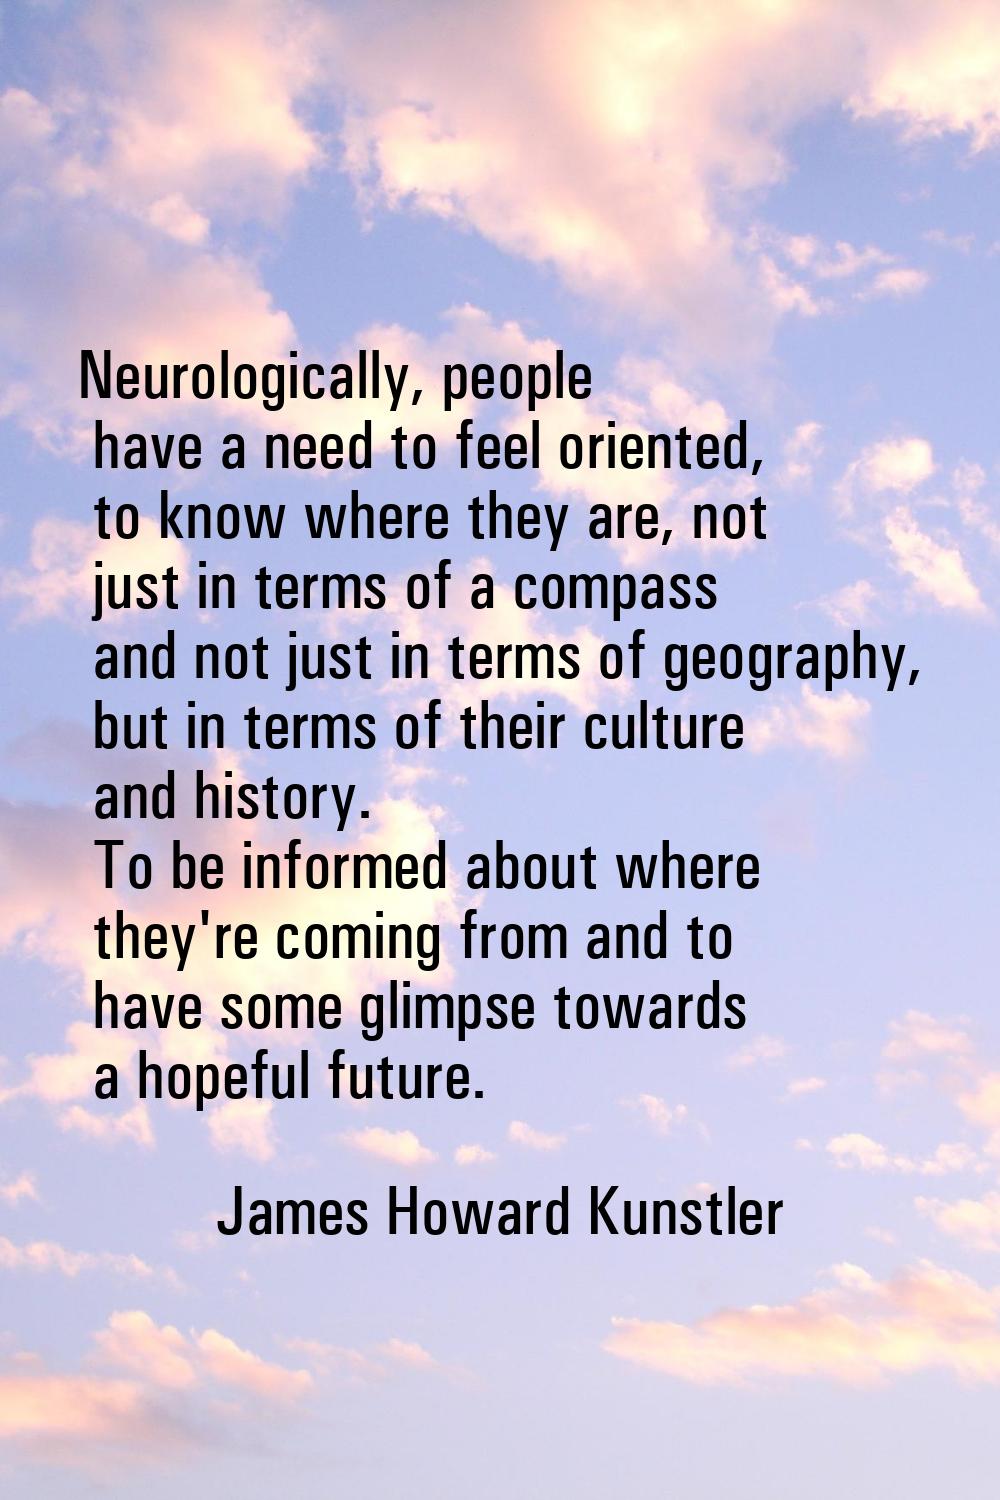 Neurologically, people have a need to feel oriented, to know where they are, not just in terms of a